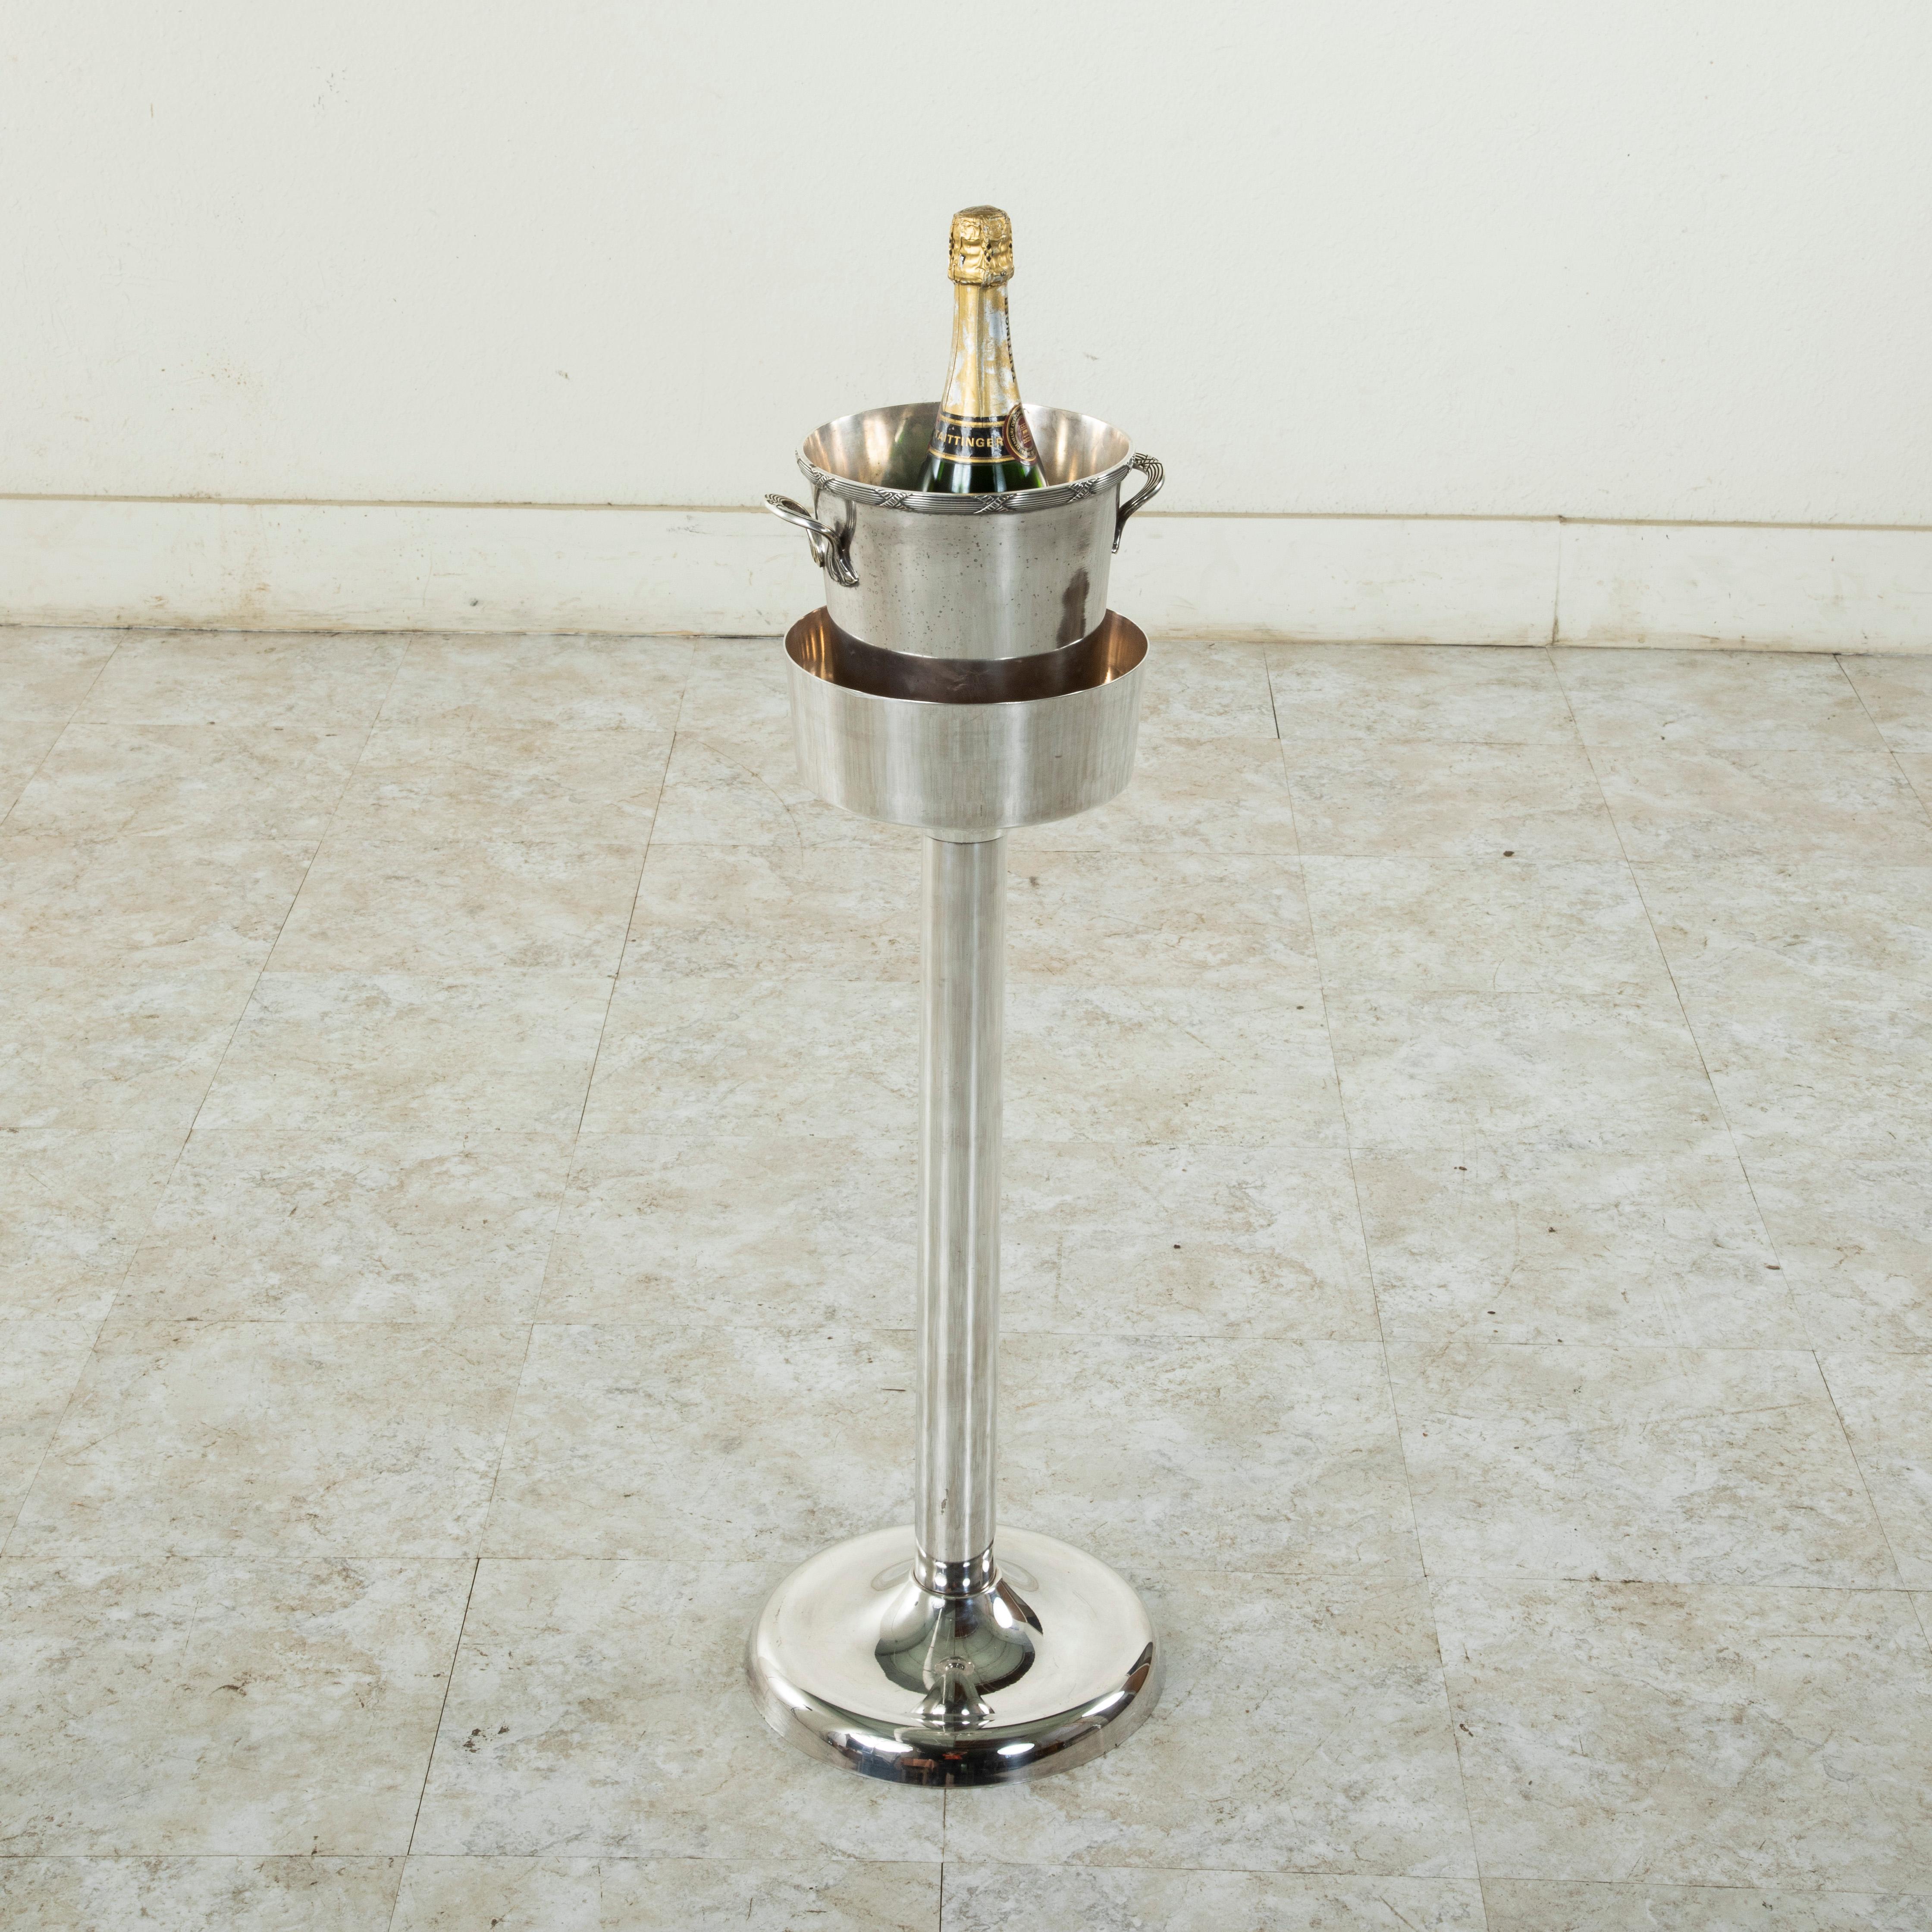 Originally used in a French restaurant to be placed beside a dining table, this silver plate champagne stand contains its original insert used to keep a champagne bucket upright and level. The stand is 26.25 inches in height with an 8 inch diameter